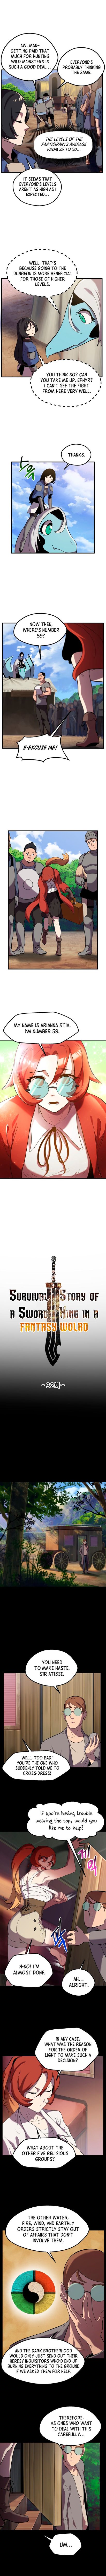 survival_story_of_a_sword_king_in_a_fantasy_world_32_2